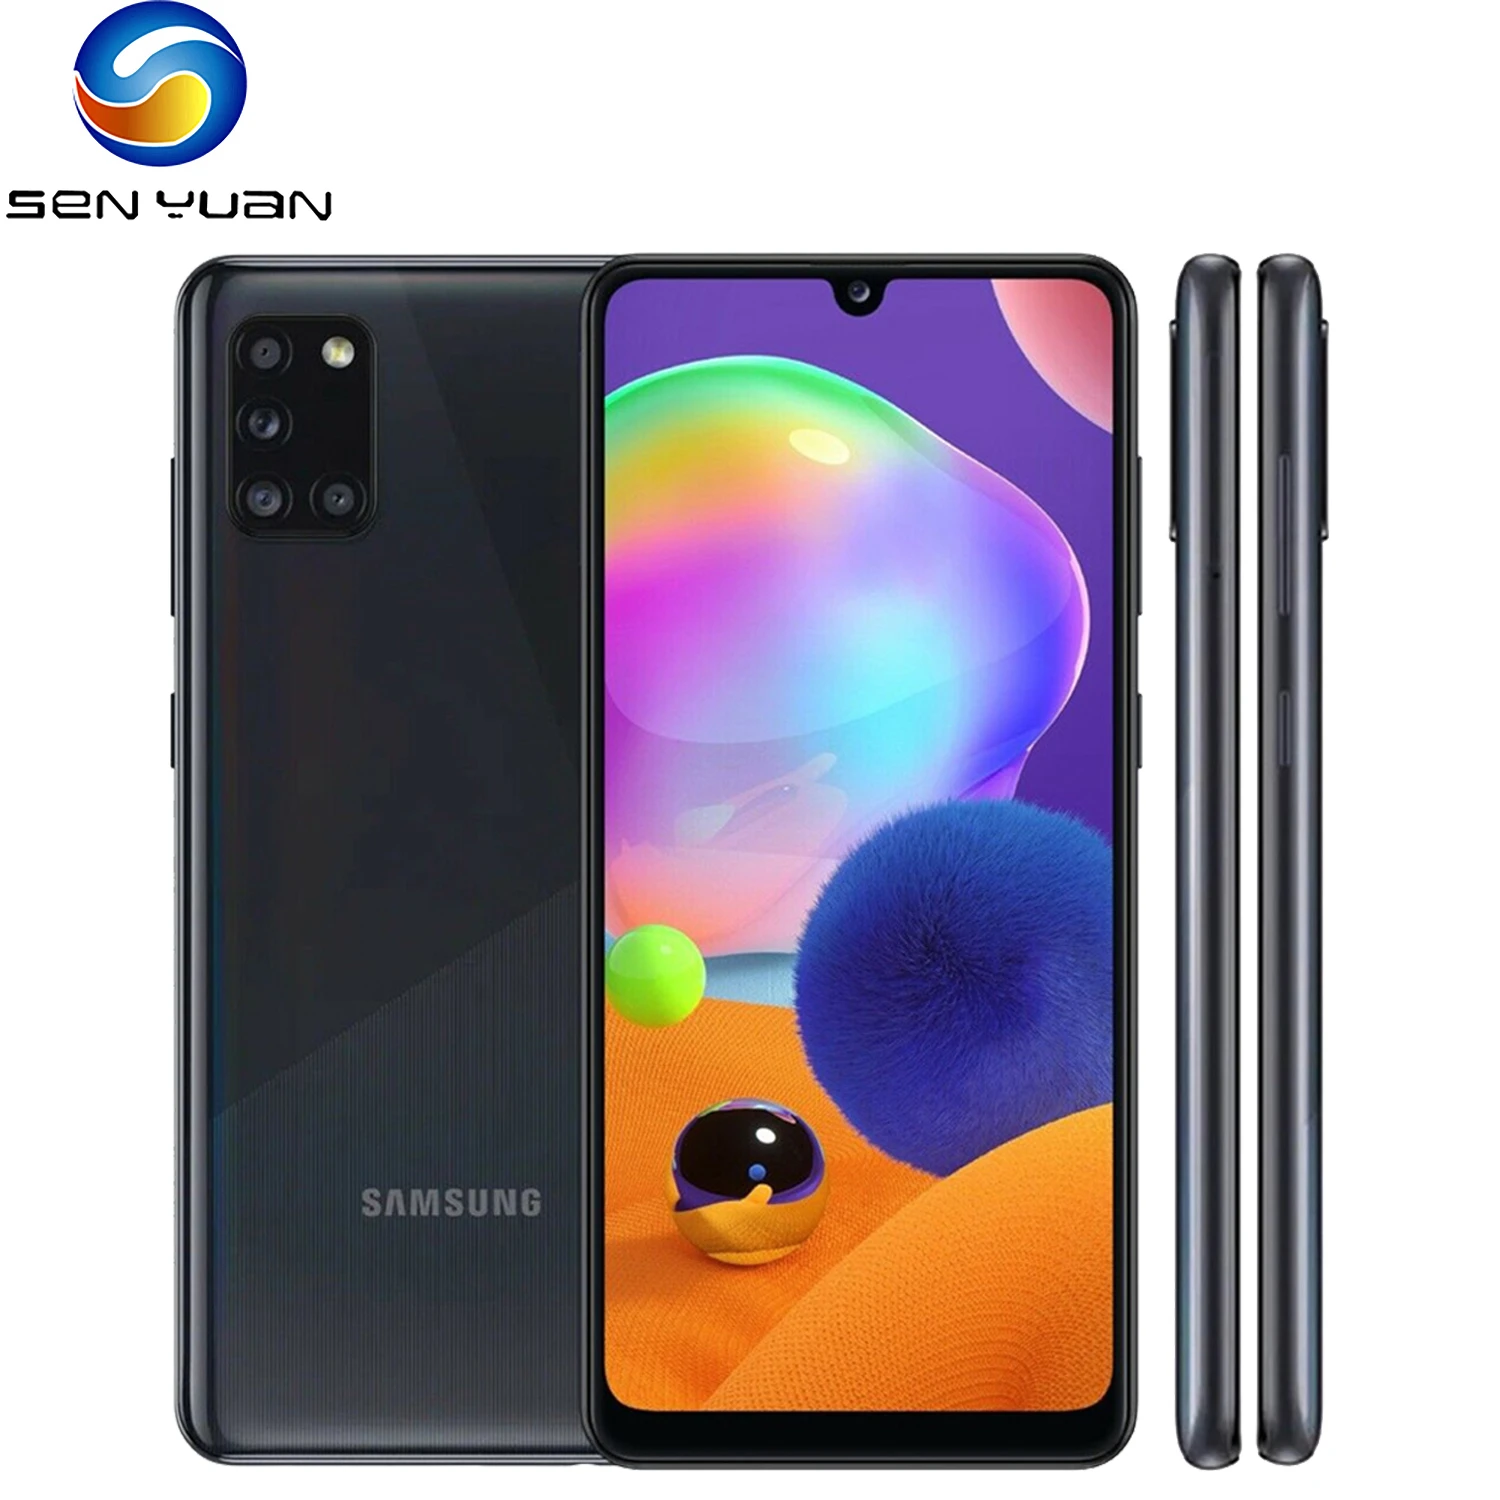 buy refurbished iphone Original Samsung Galaxy A31 4G LTE Mobile Phone A315N Single SIM Korea Version 6.4" 4GB+64GB 48MP CellPhone Android Smartphone second hand iphone